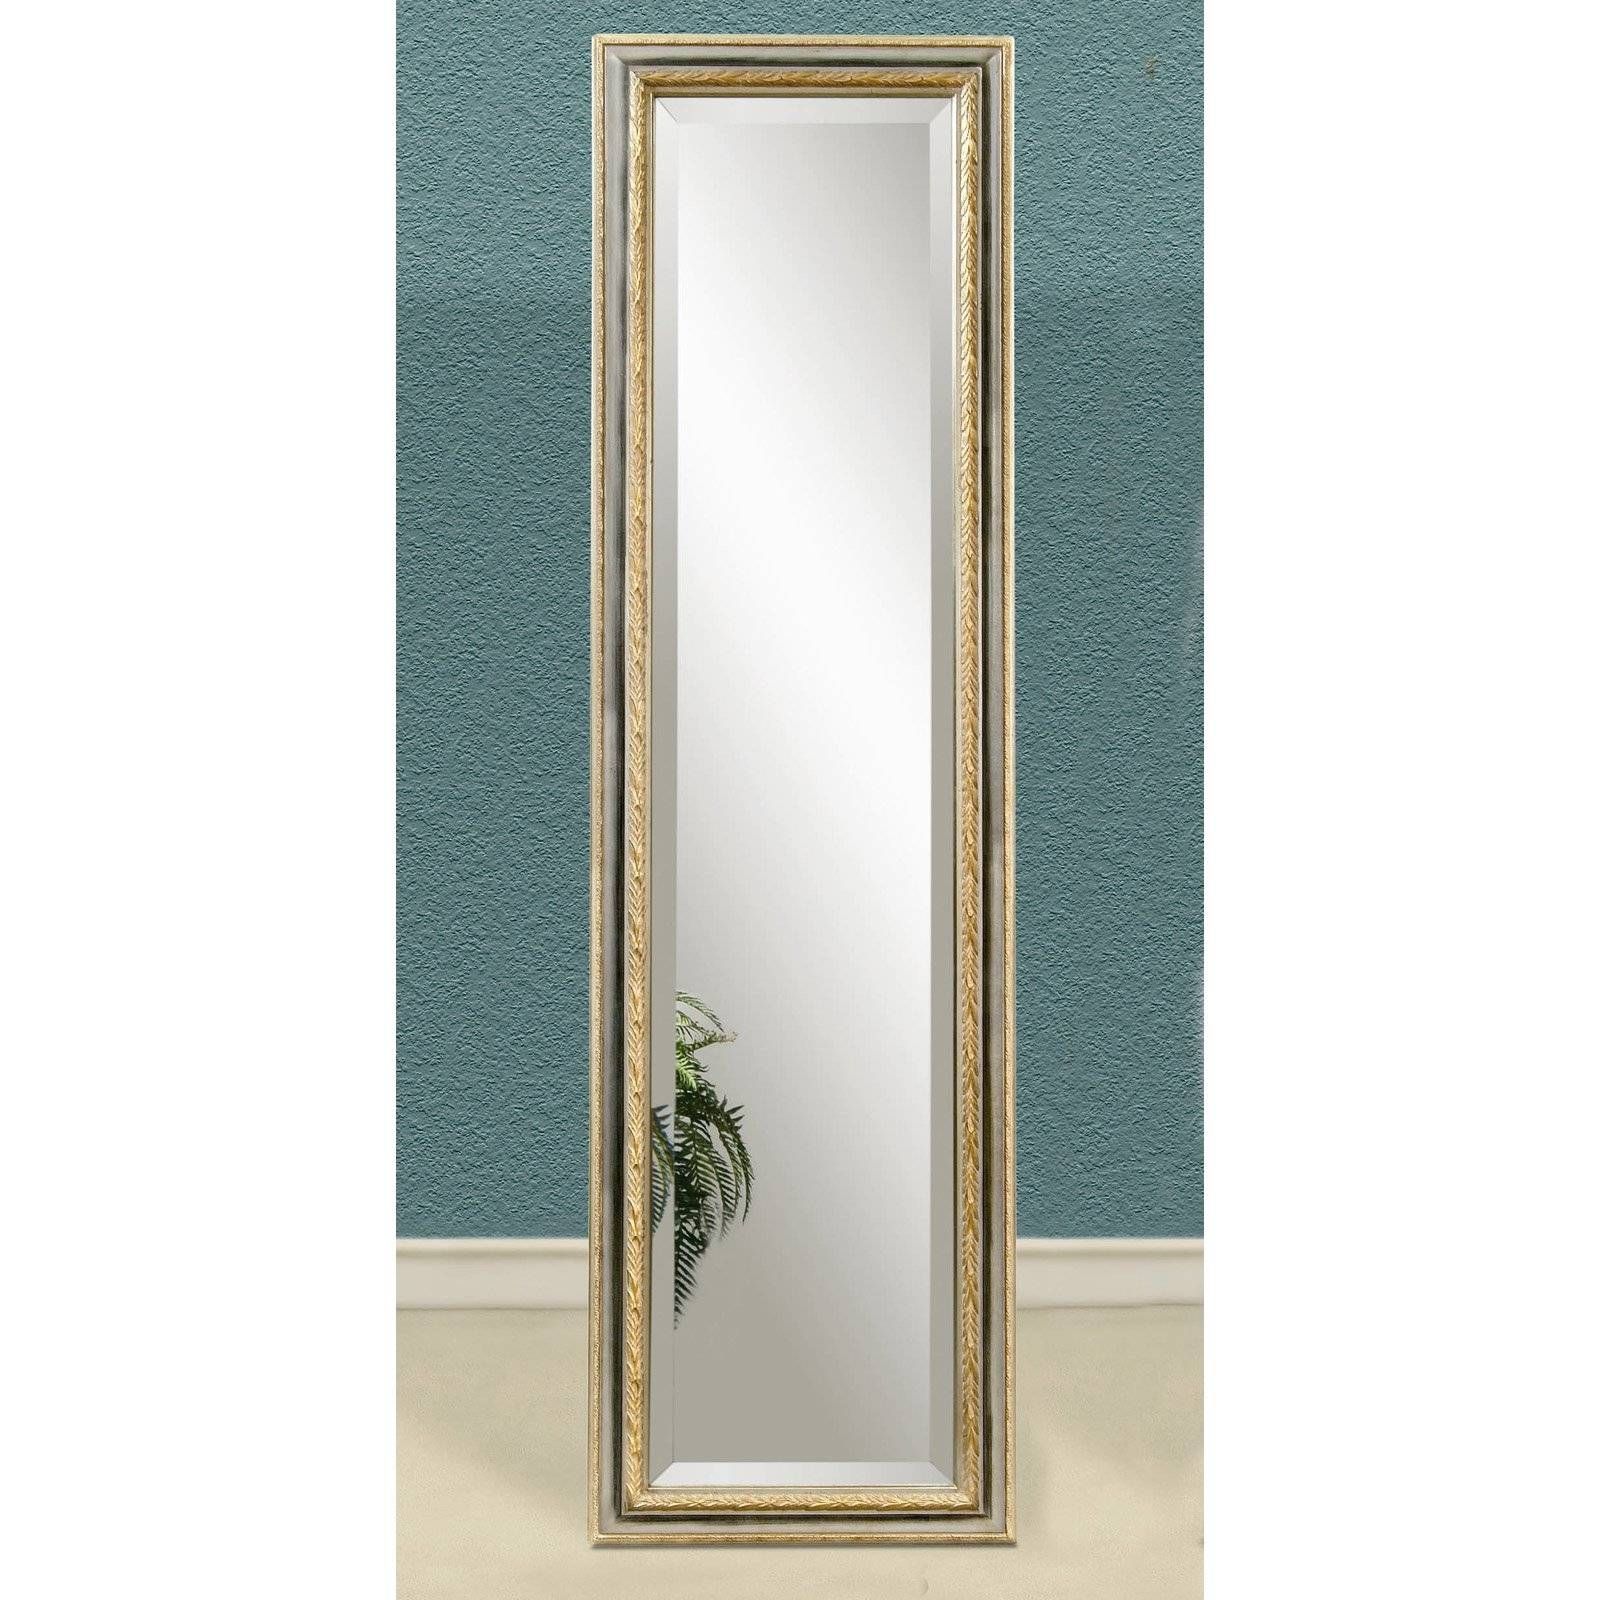 Full Length Floor Mirror Cool Mirrors Ornate Ornament Frame Can With Ornate Floor Length Mirrors (View 6 of 15)